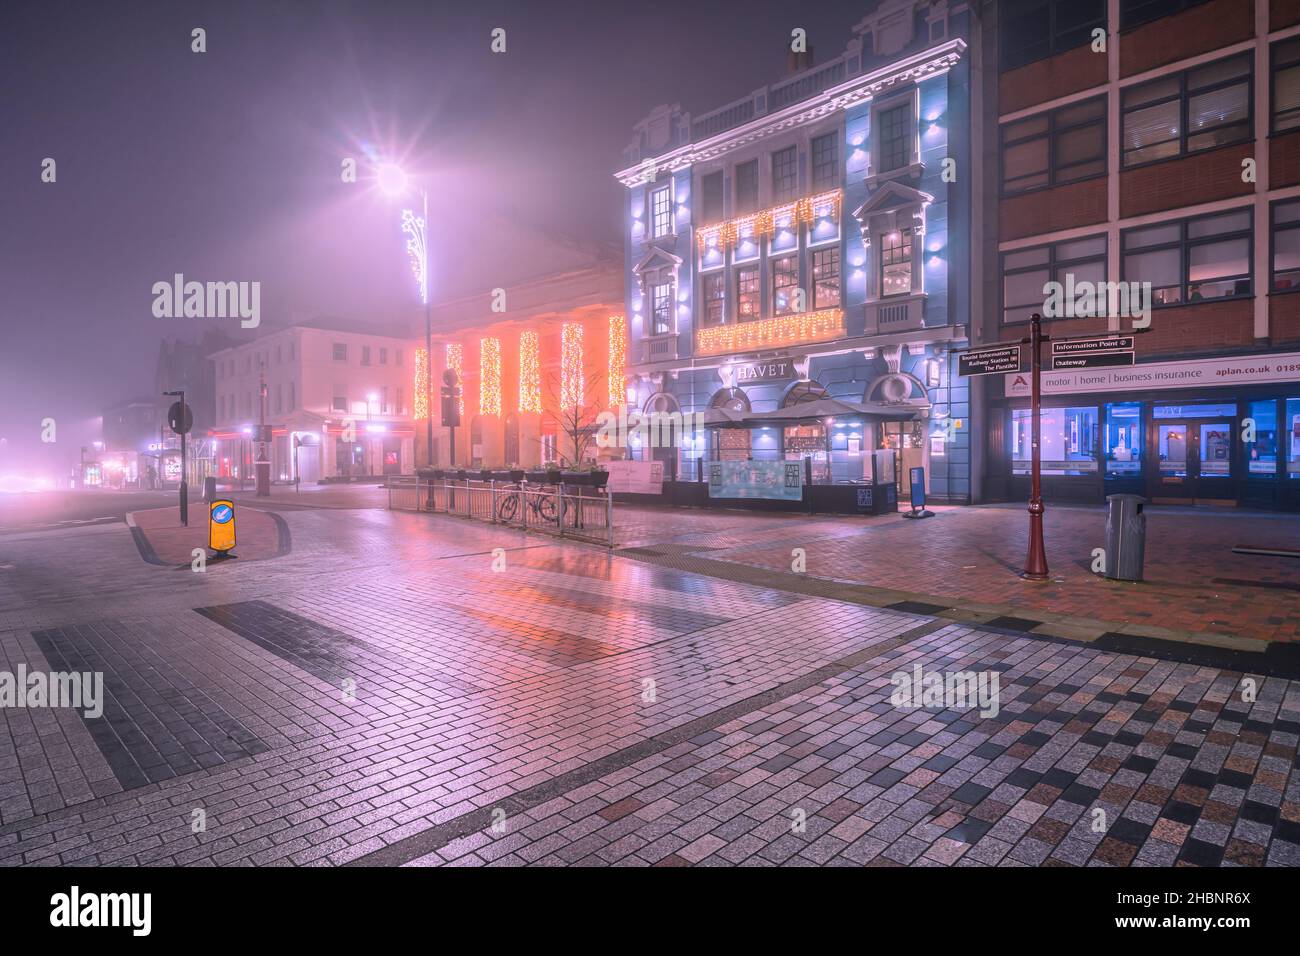 Tunbridge Wells, Kent, UK. 19th Dec, 2021. The town centre Christmas decoration is deserted, with shoppers deserting the town in droves., Credit: Sarah Mott/Alamy Live News Stock Photo